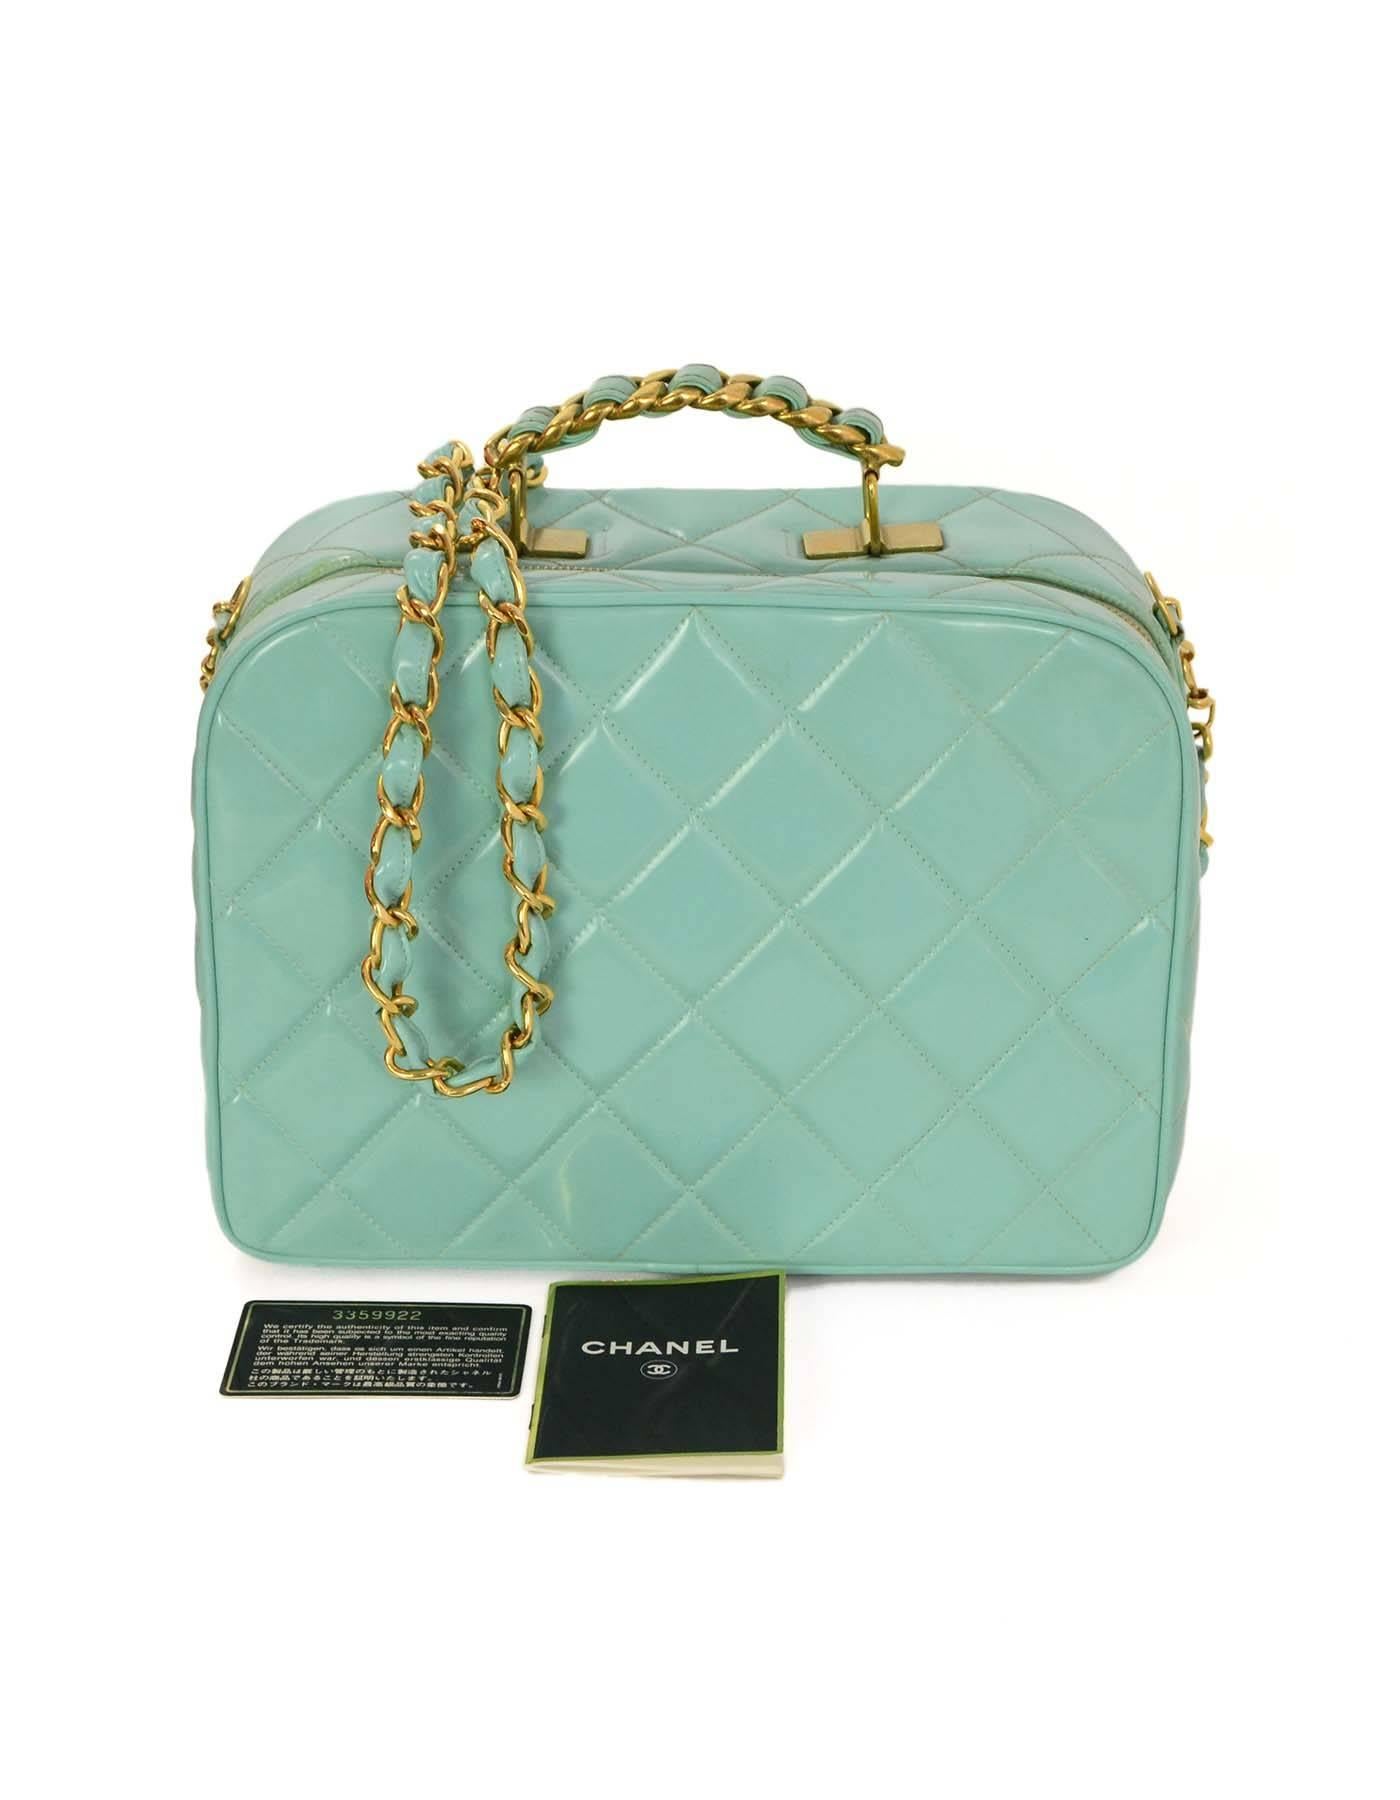 Chanel Vintage Teal Quilted Patent Vanity Crossbody Bag GHW 4